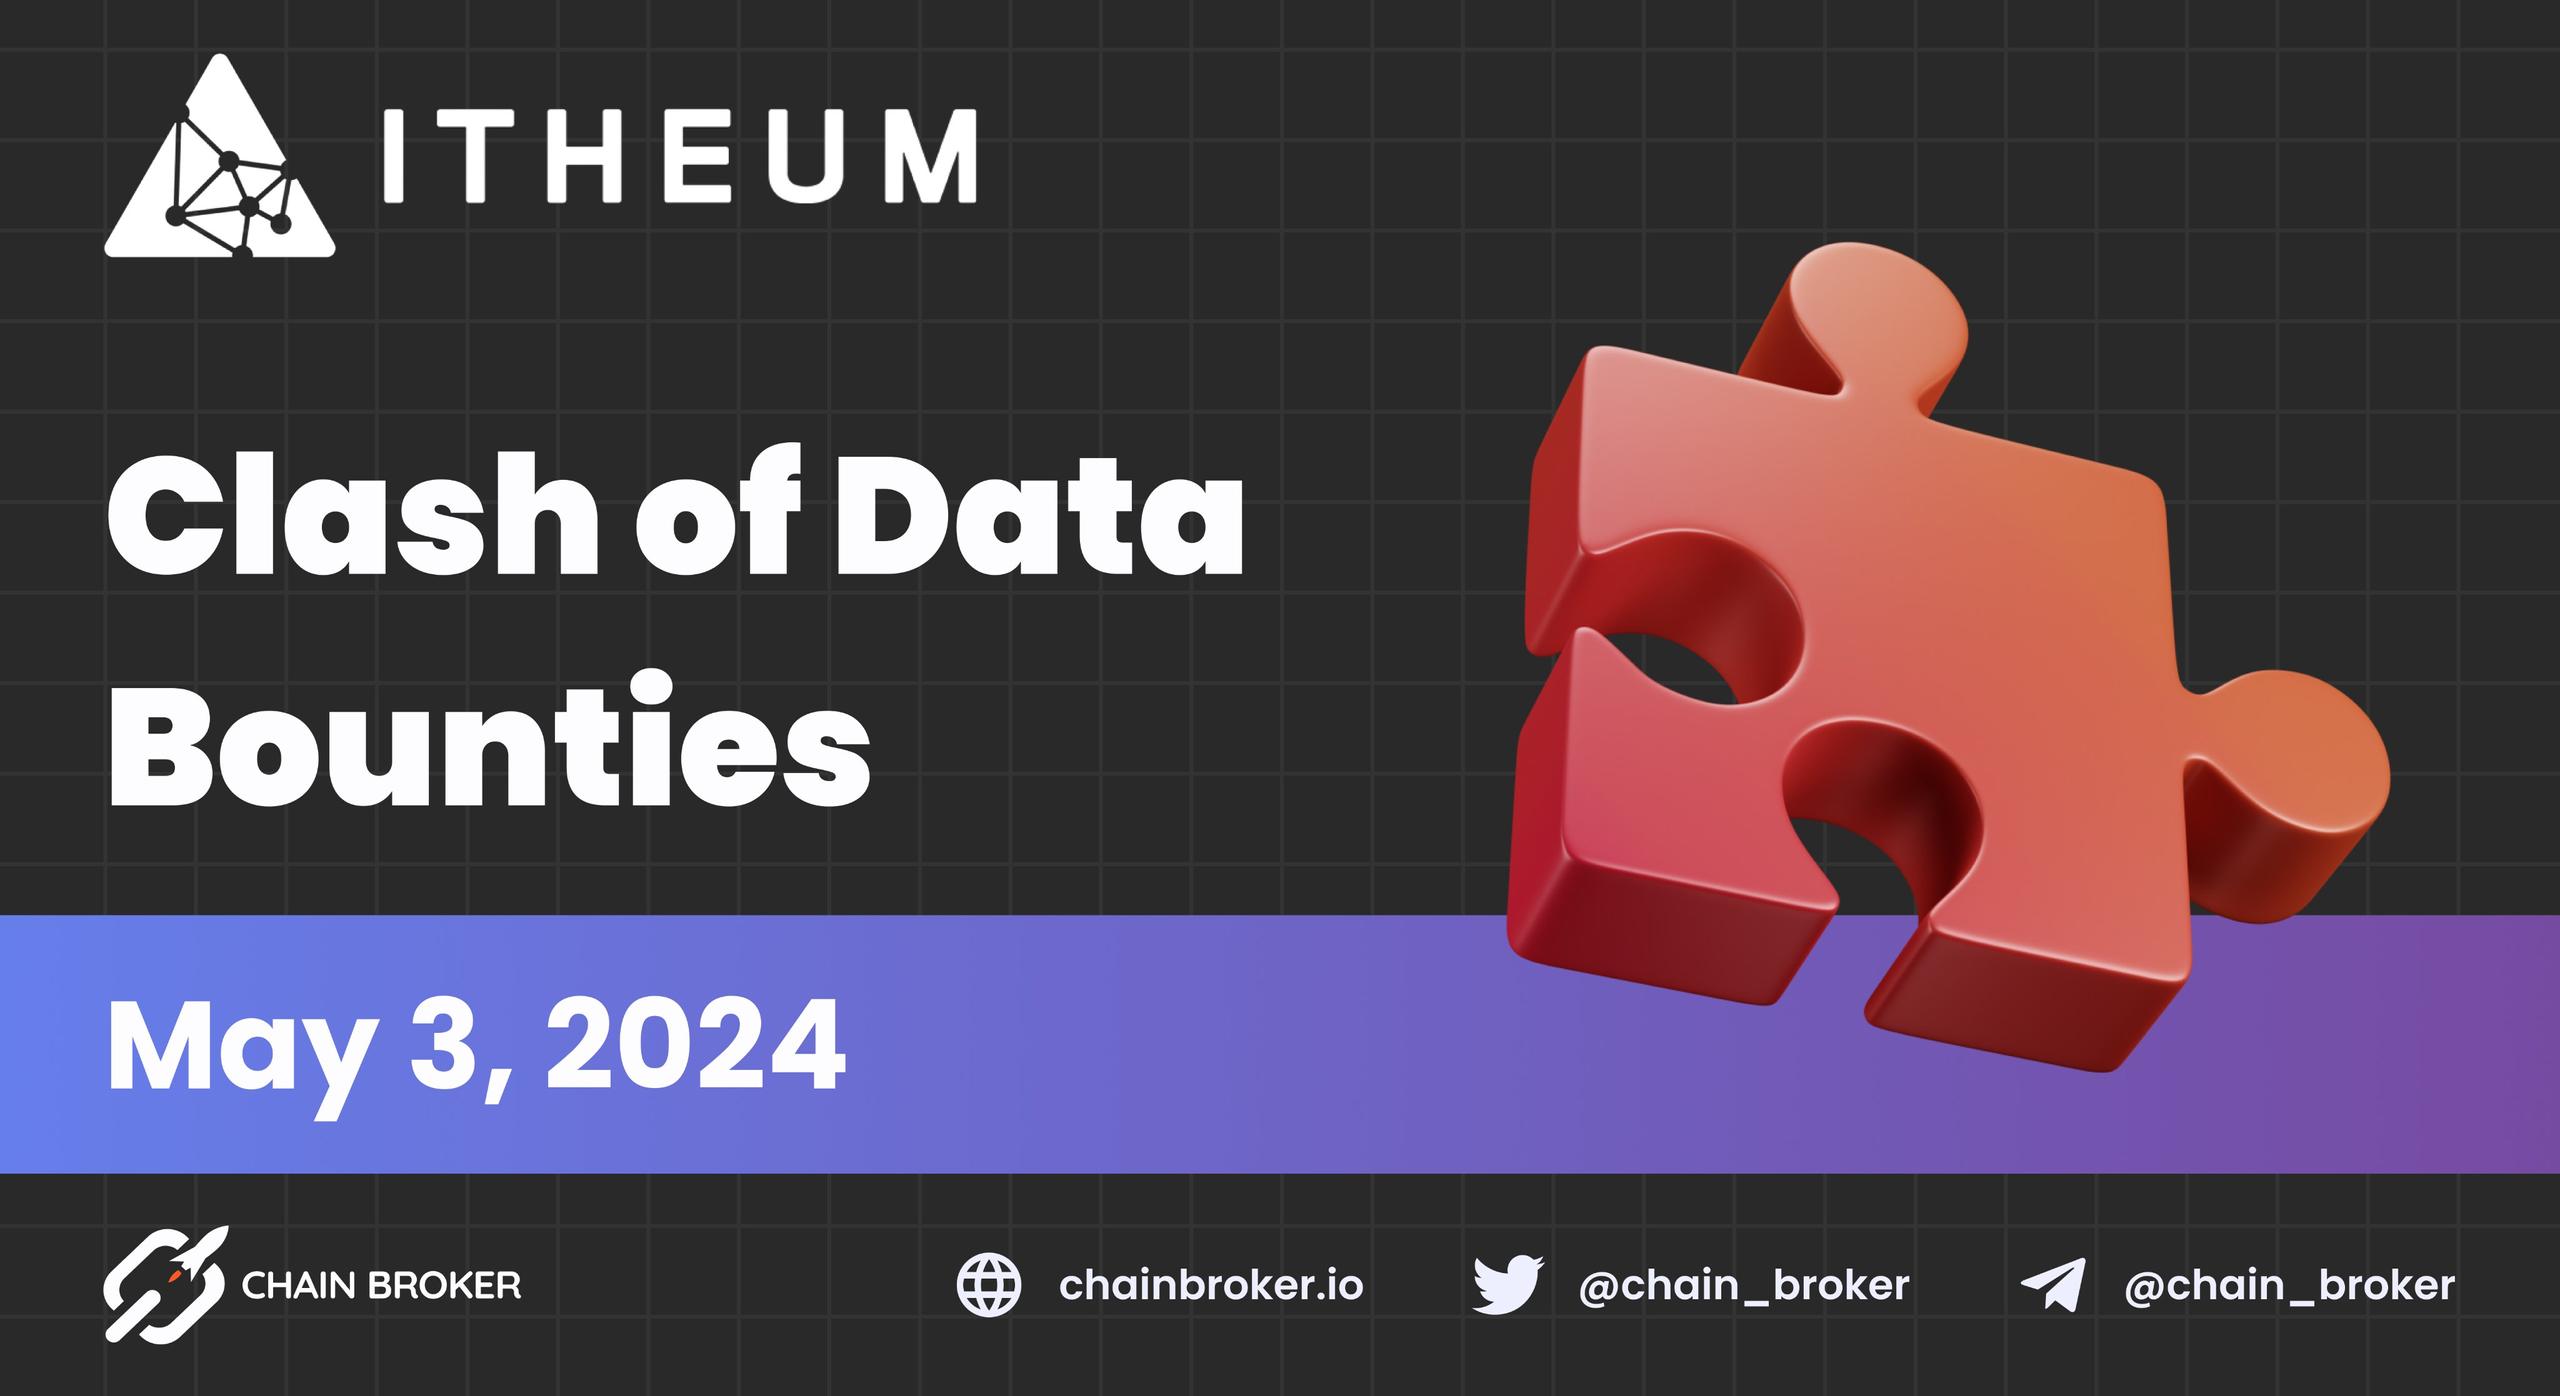 Itheum introduces the "Clash of Data Bounties" campaign